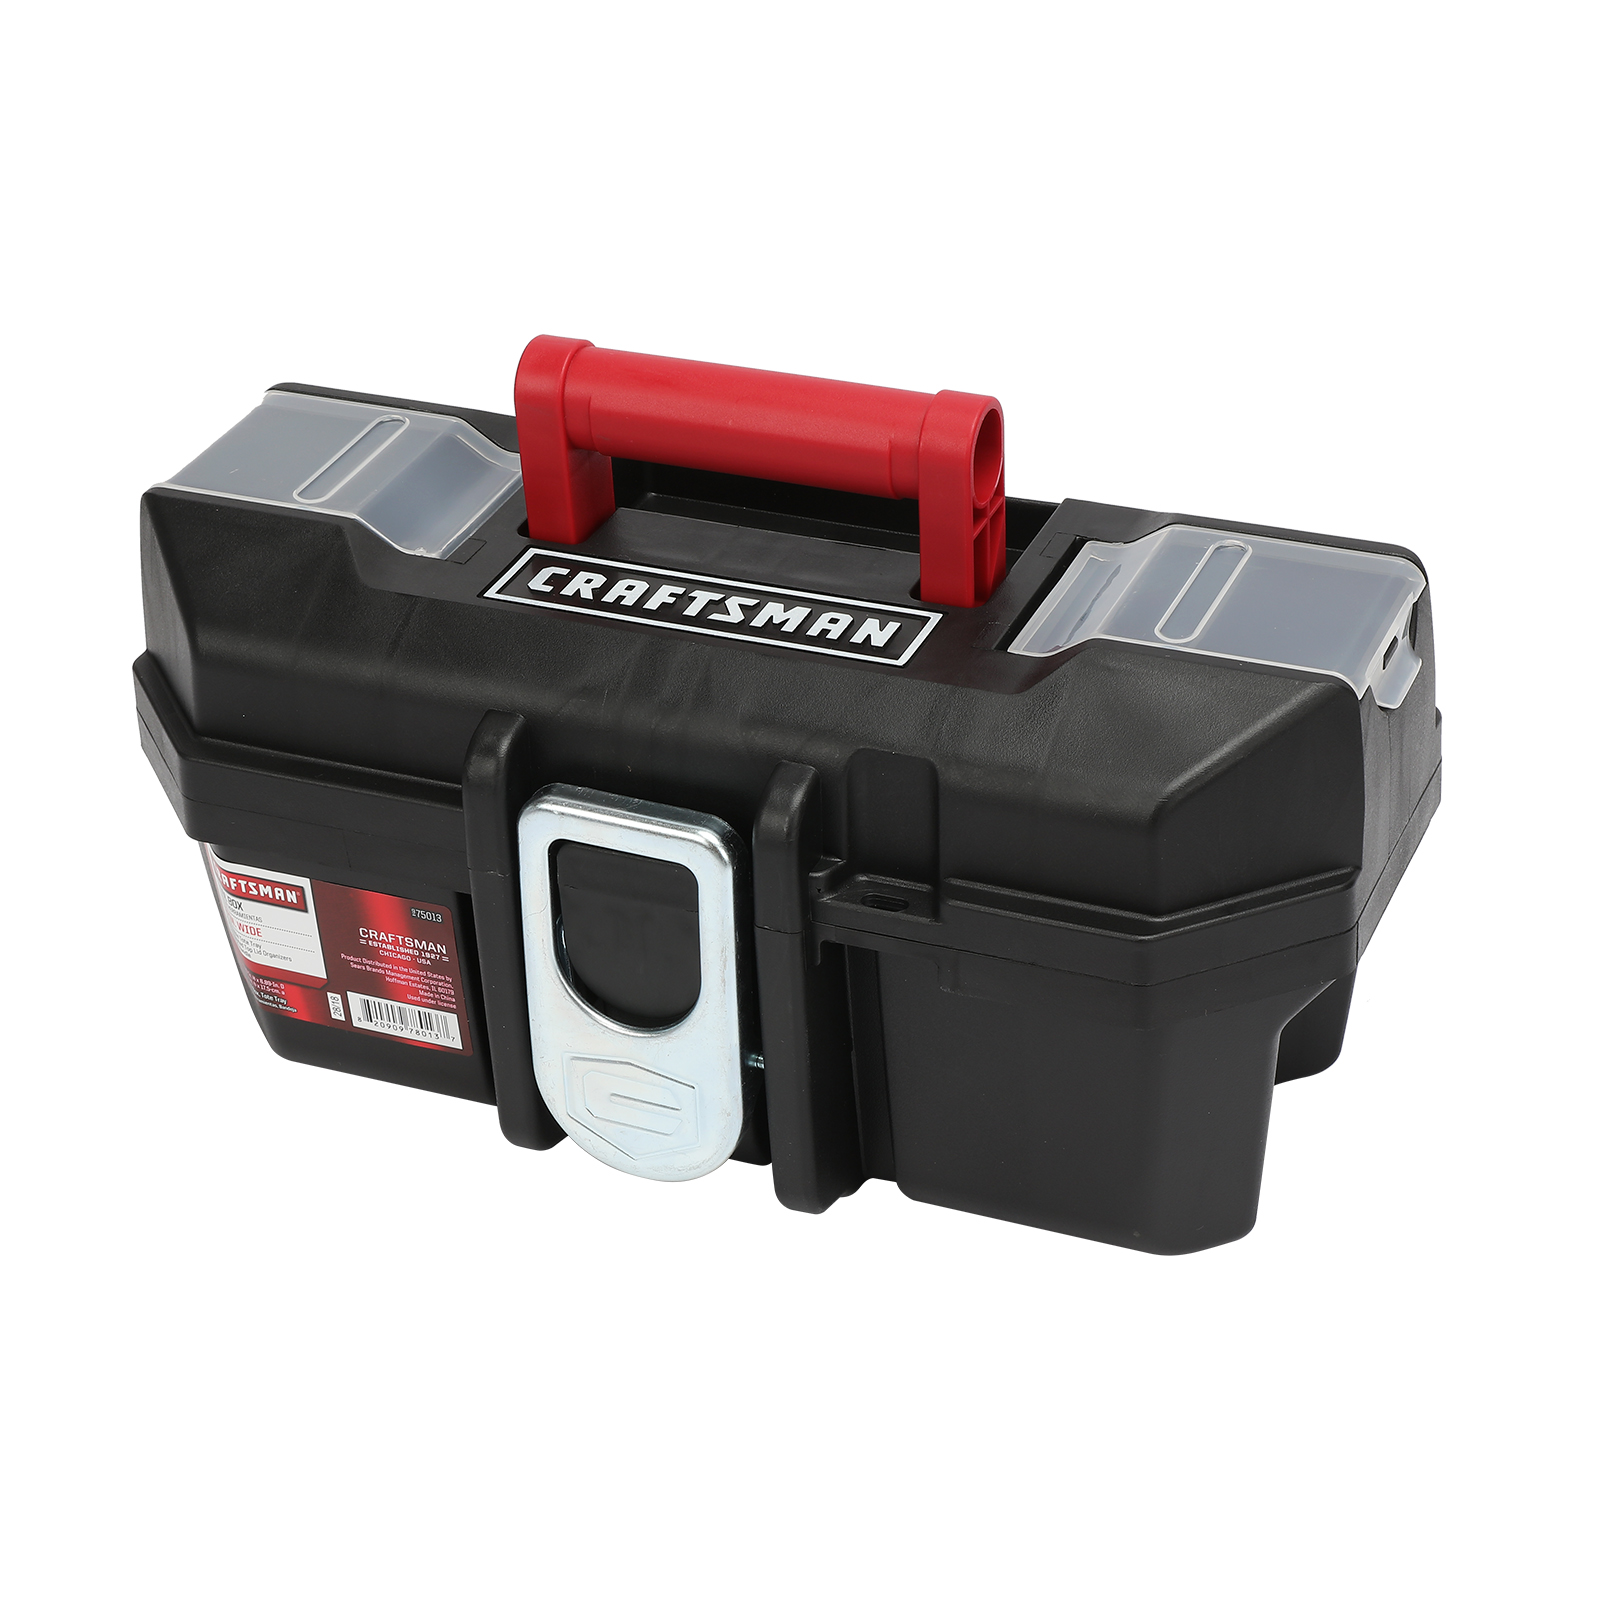 Craftsman 13-in Toolbox with Tray - Black/Red